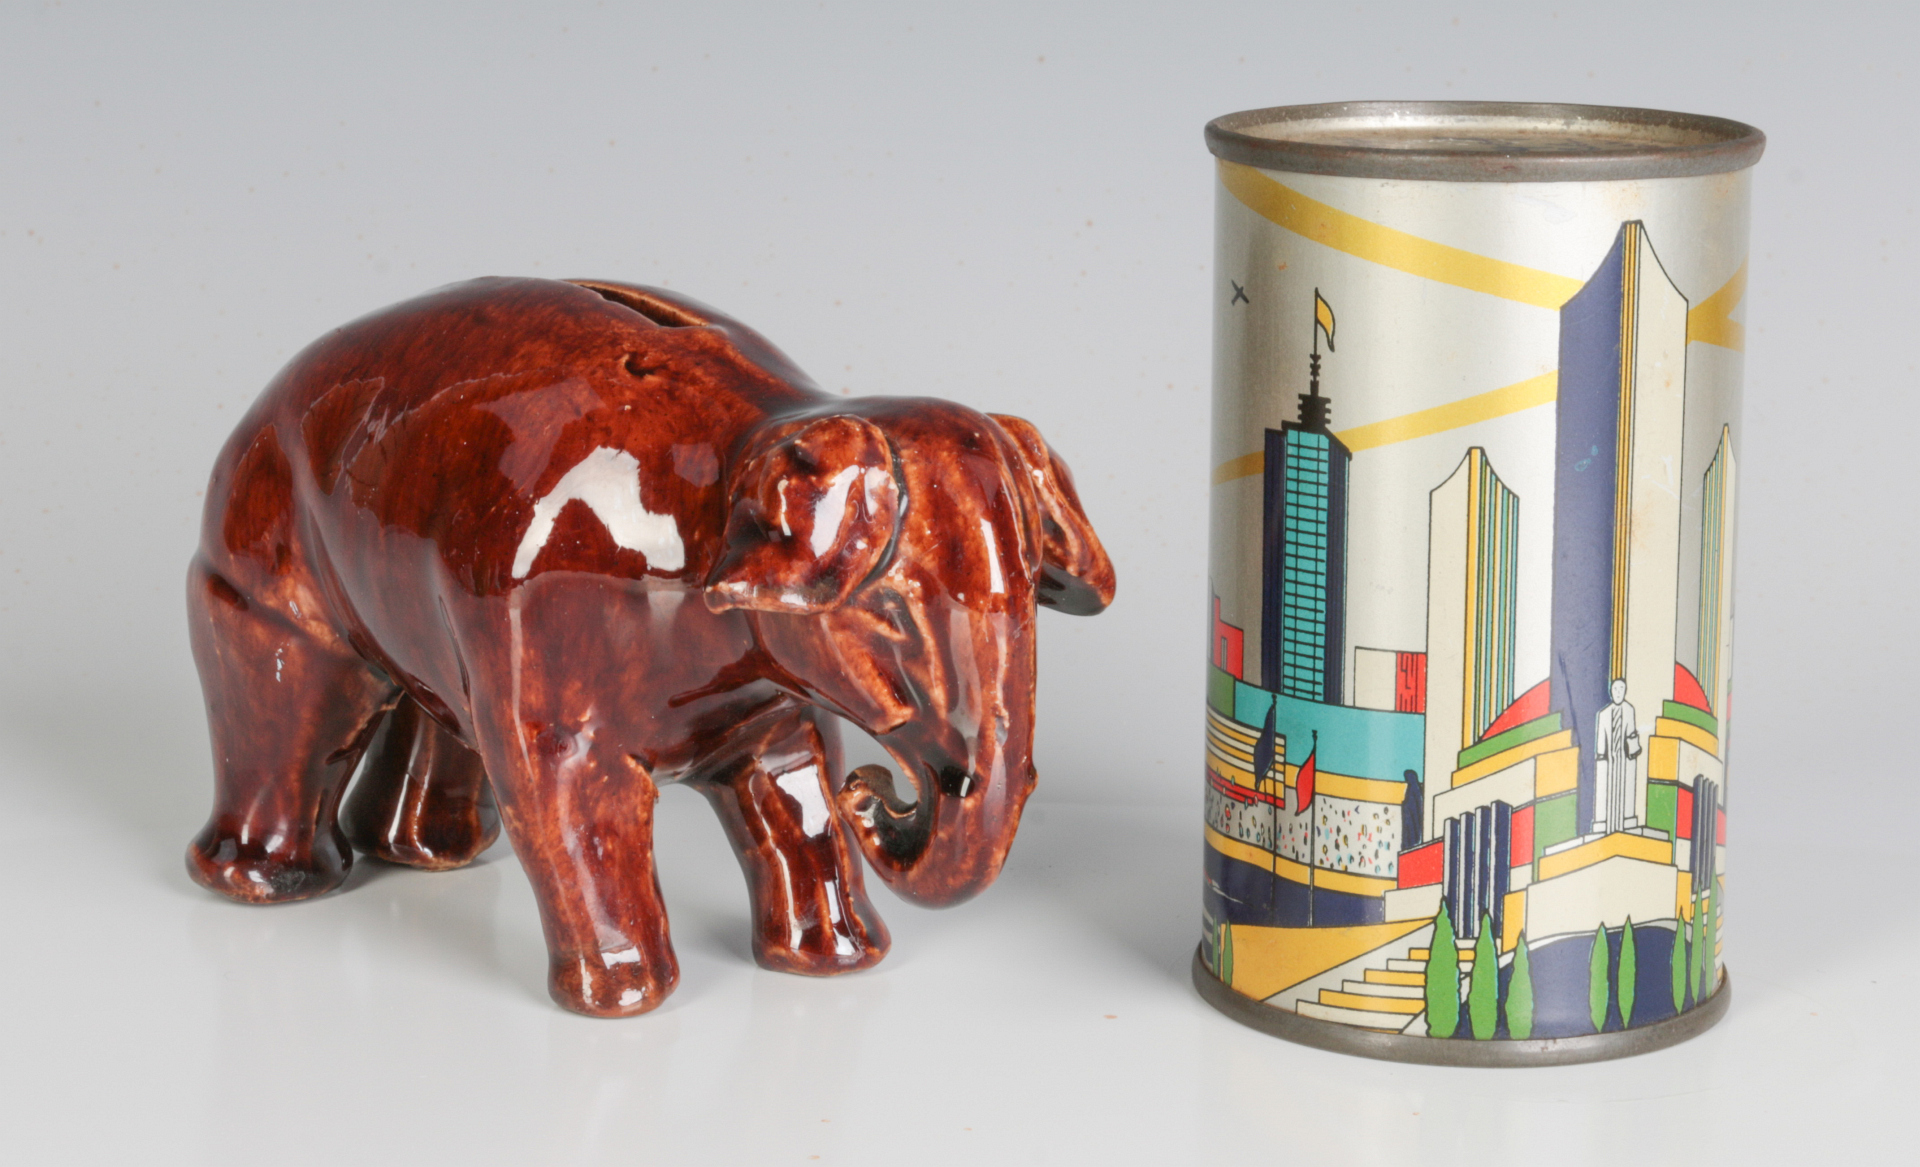 COLLECTIBLE COIN BANKS, WORLD'S FAIR AND ELEPHANT